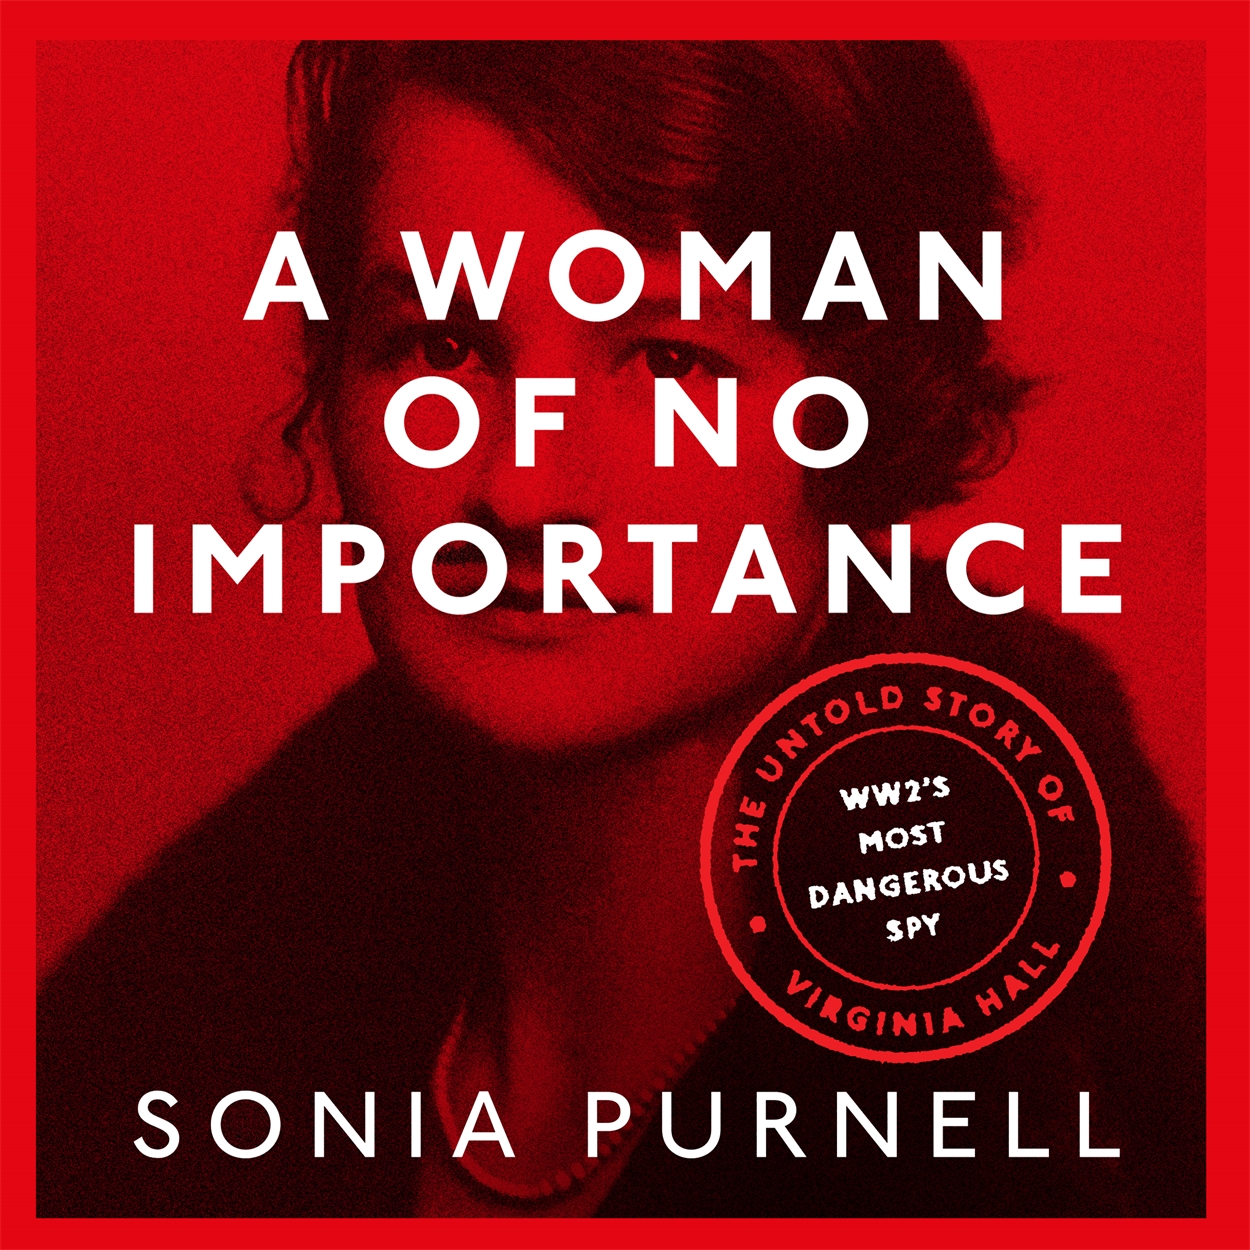 a woman of no importance by sonia purnell review